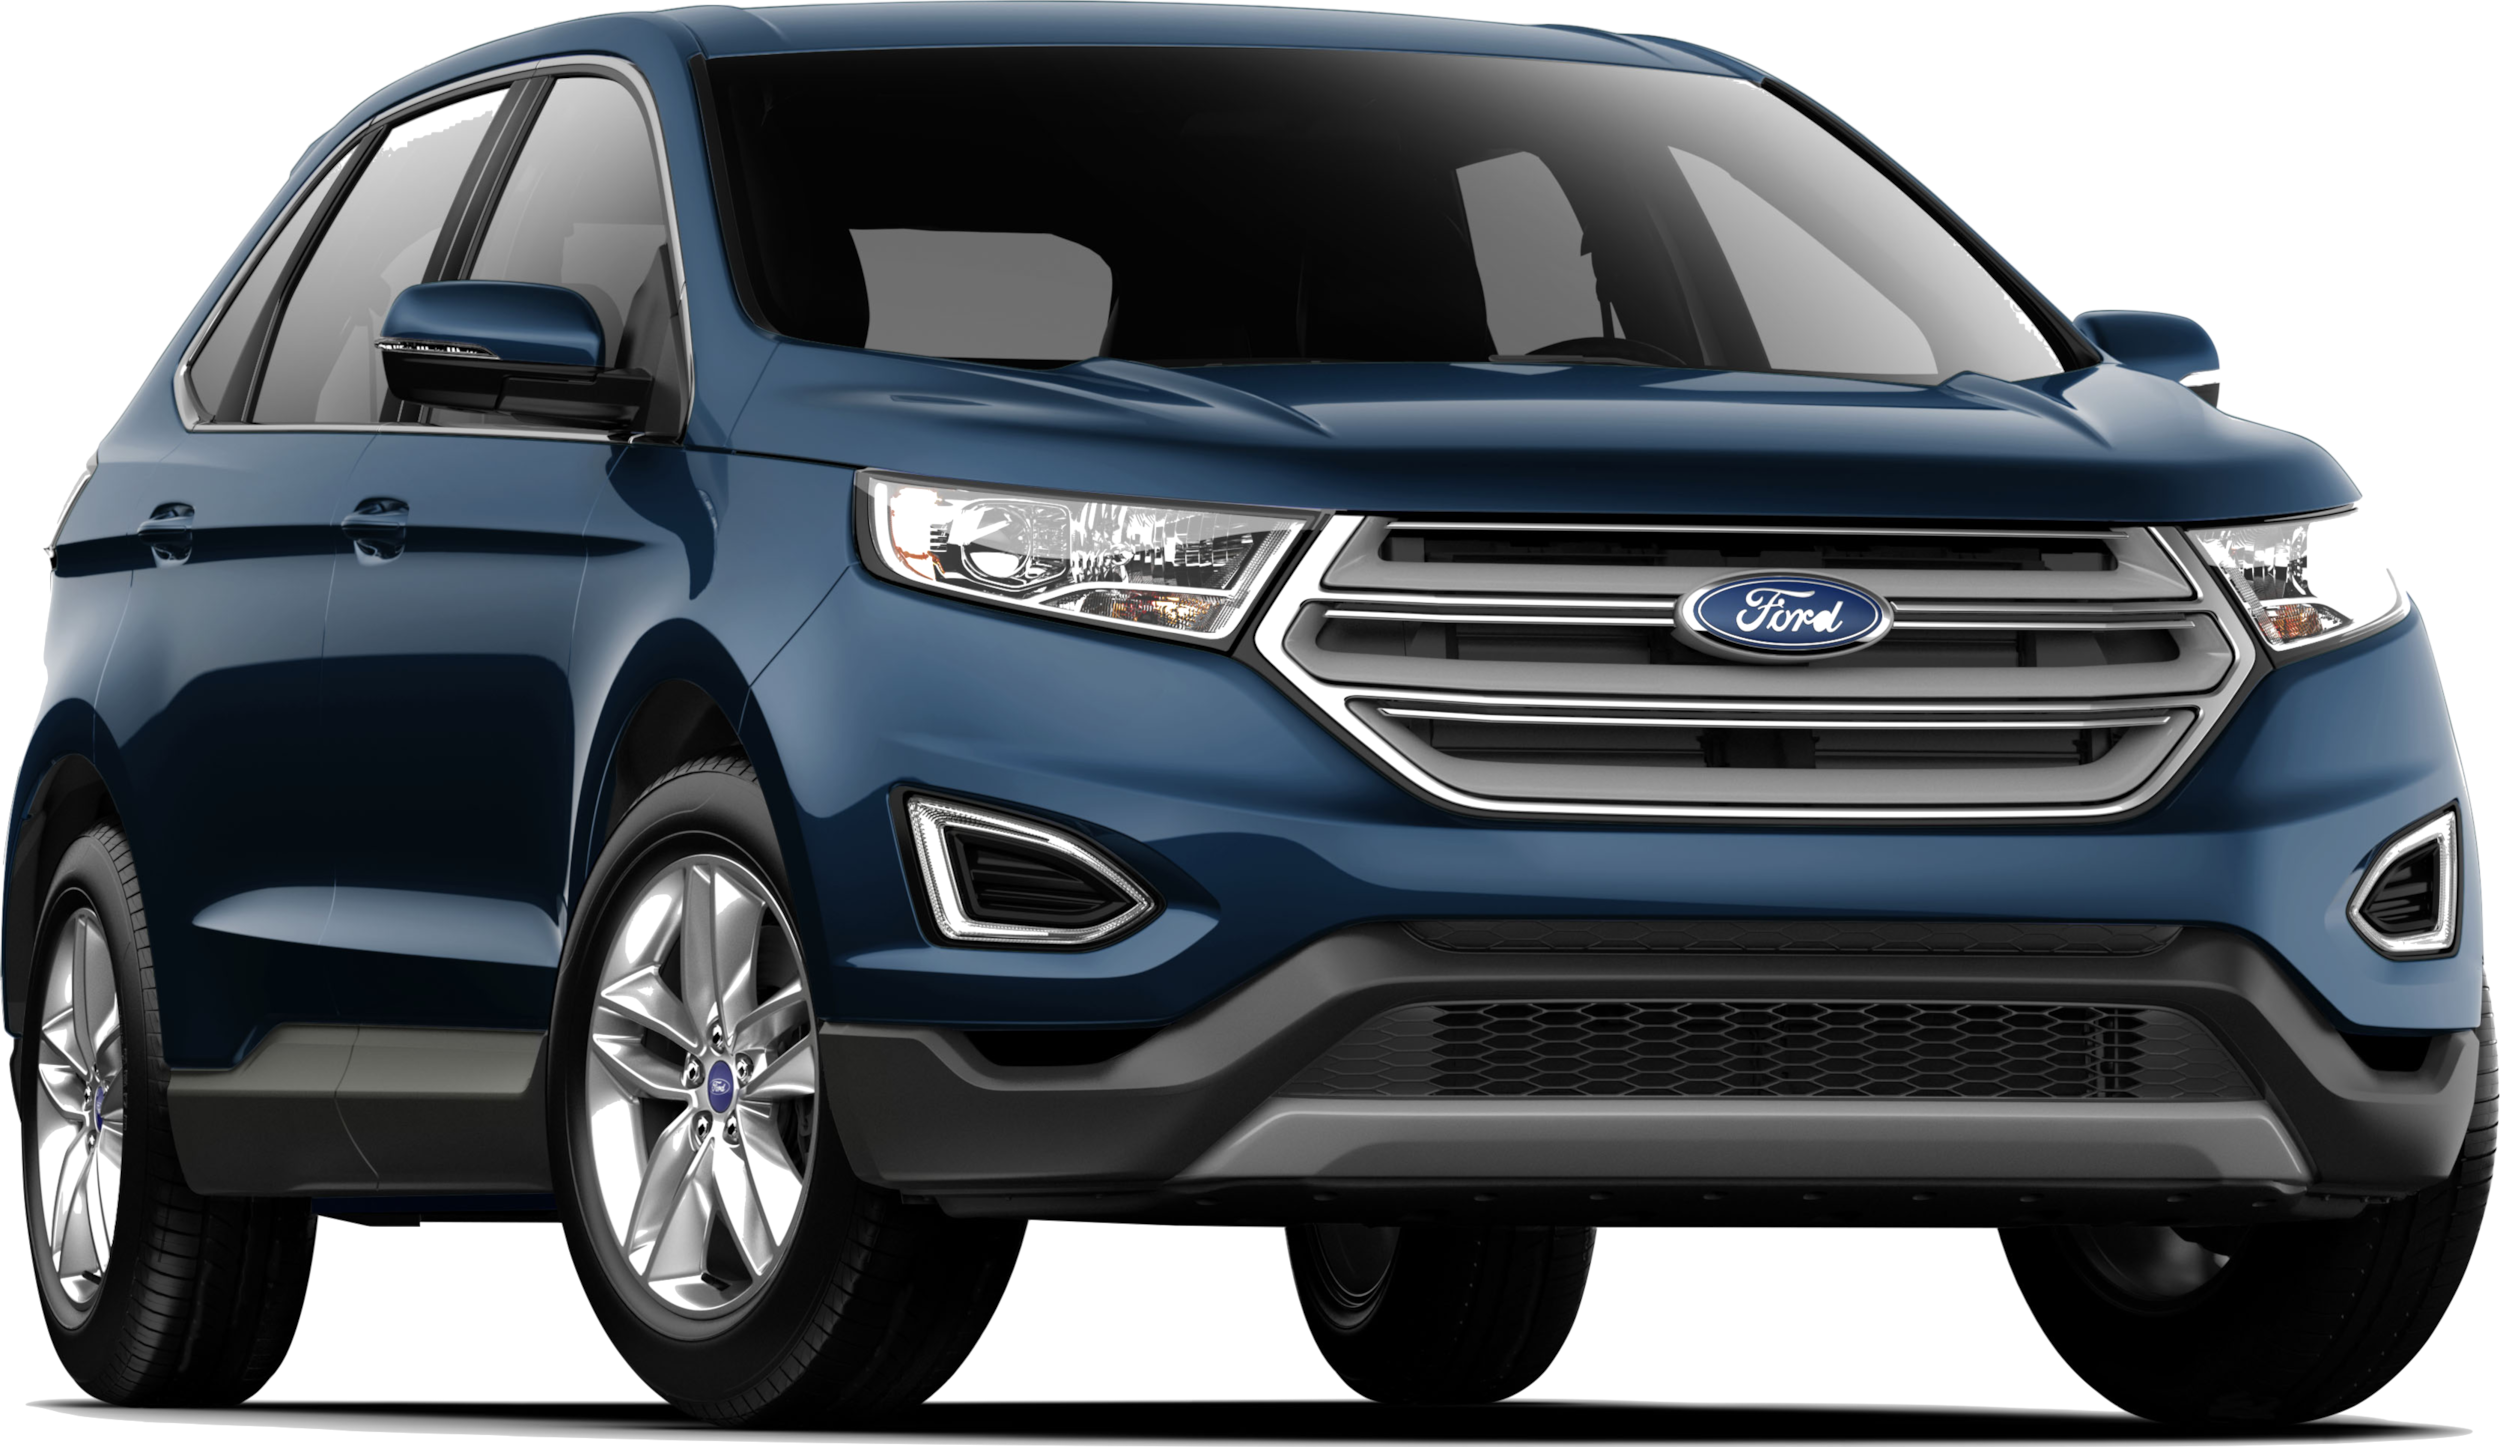 2019-ford-edge-lease-deal-319-mo-for-36-months-zeigler-ford-of-north-riverside